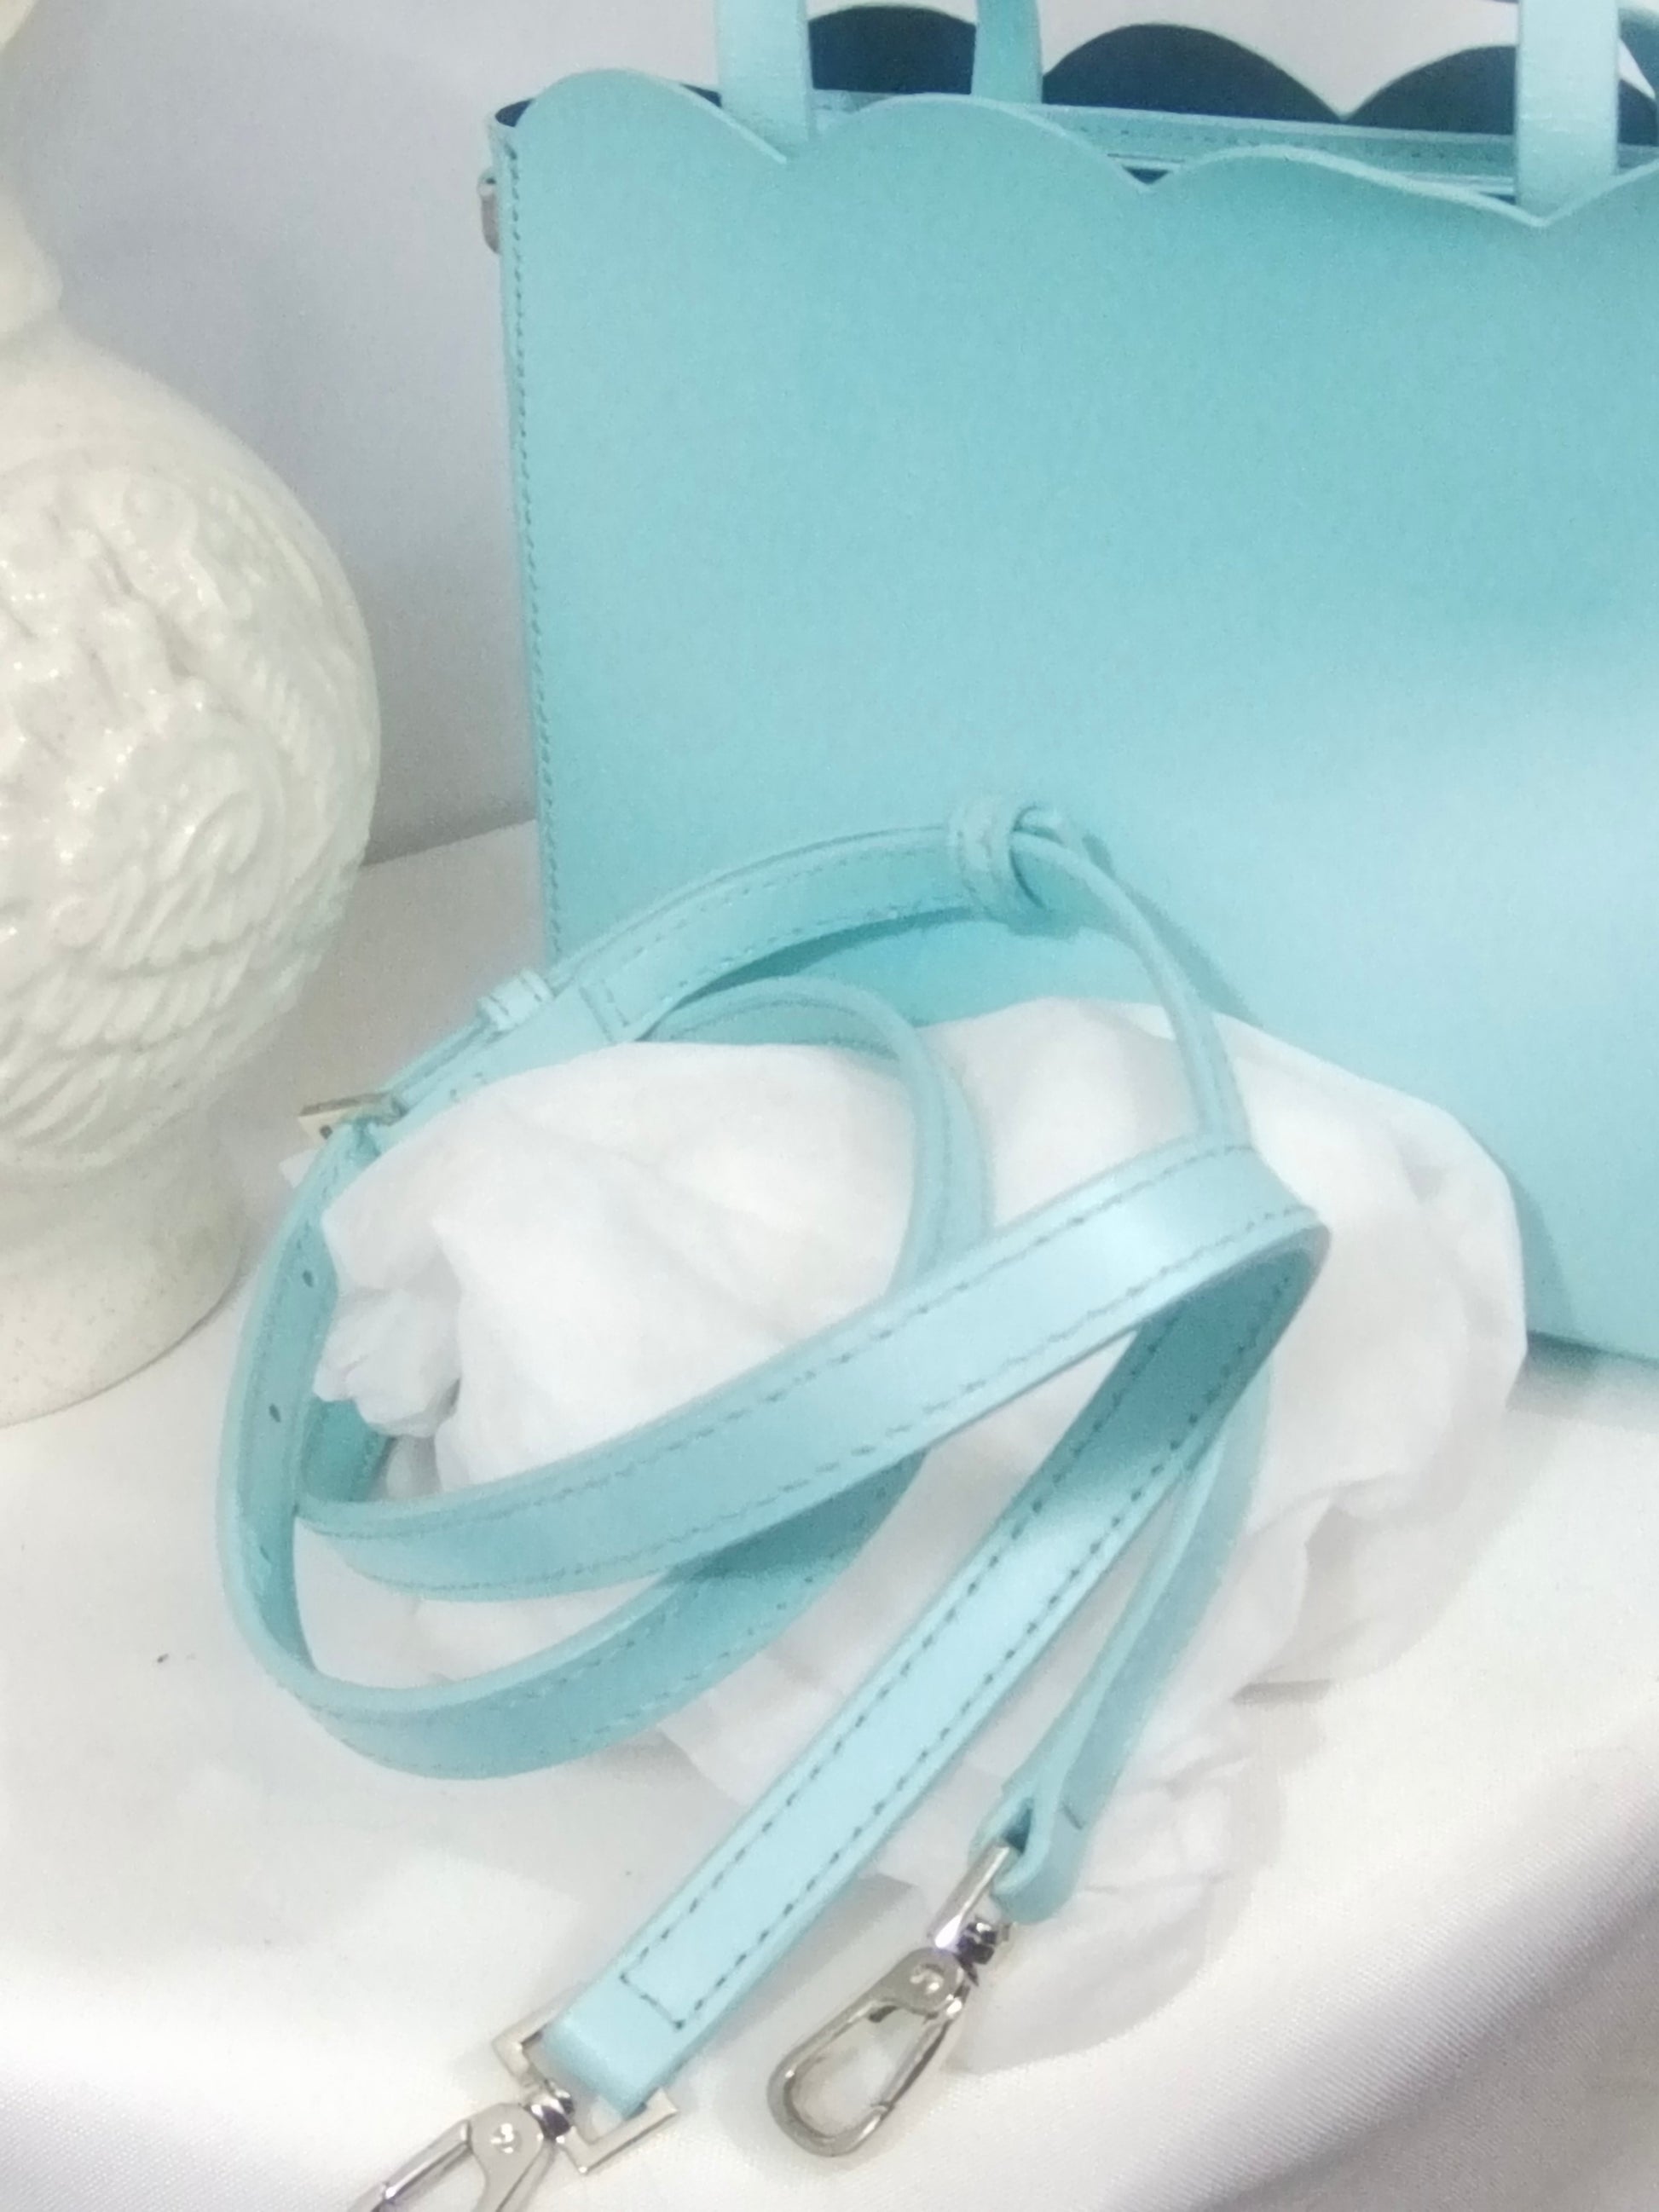 Kate Spade Turquoise Purse with Double Handles and Scalloped